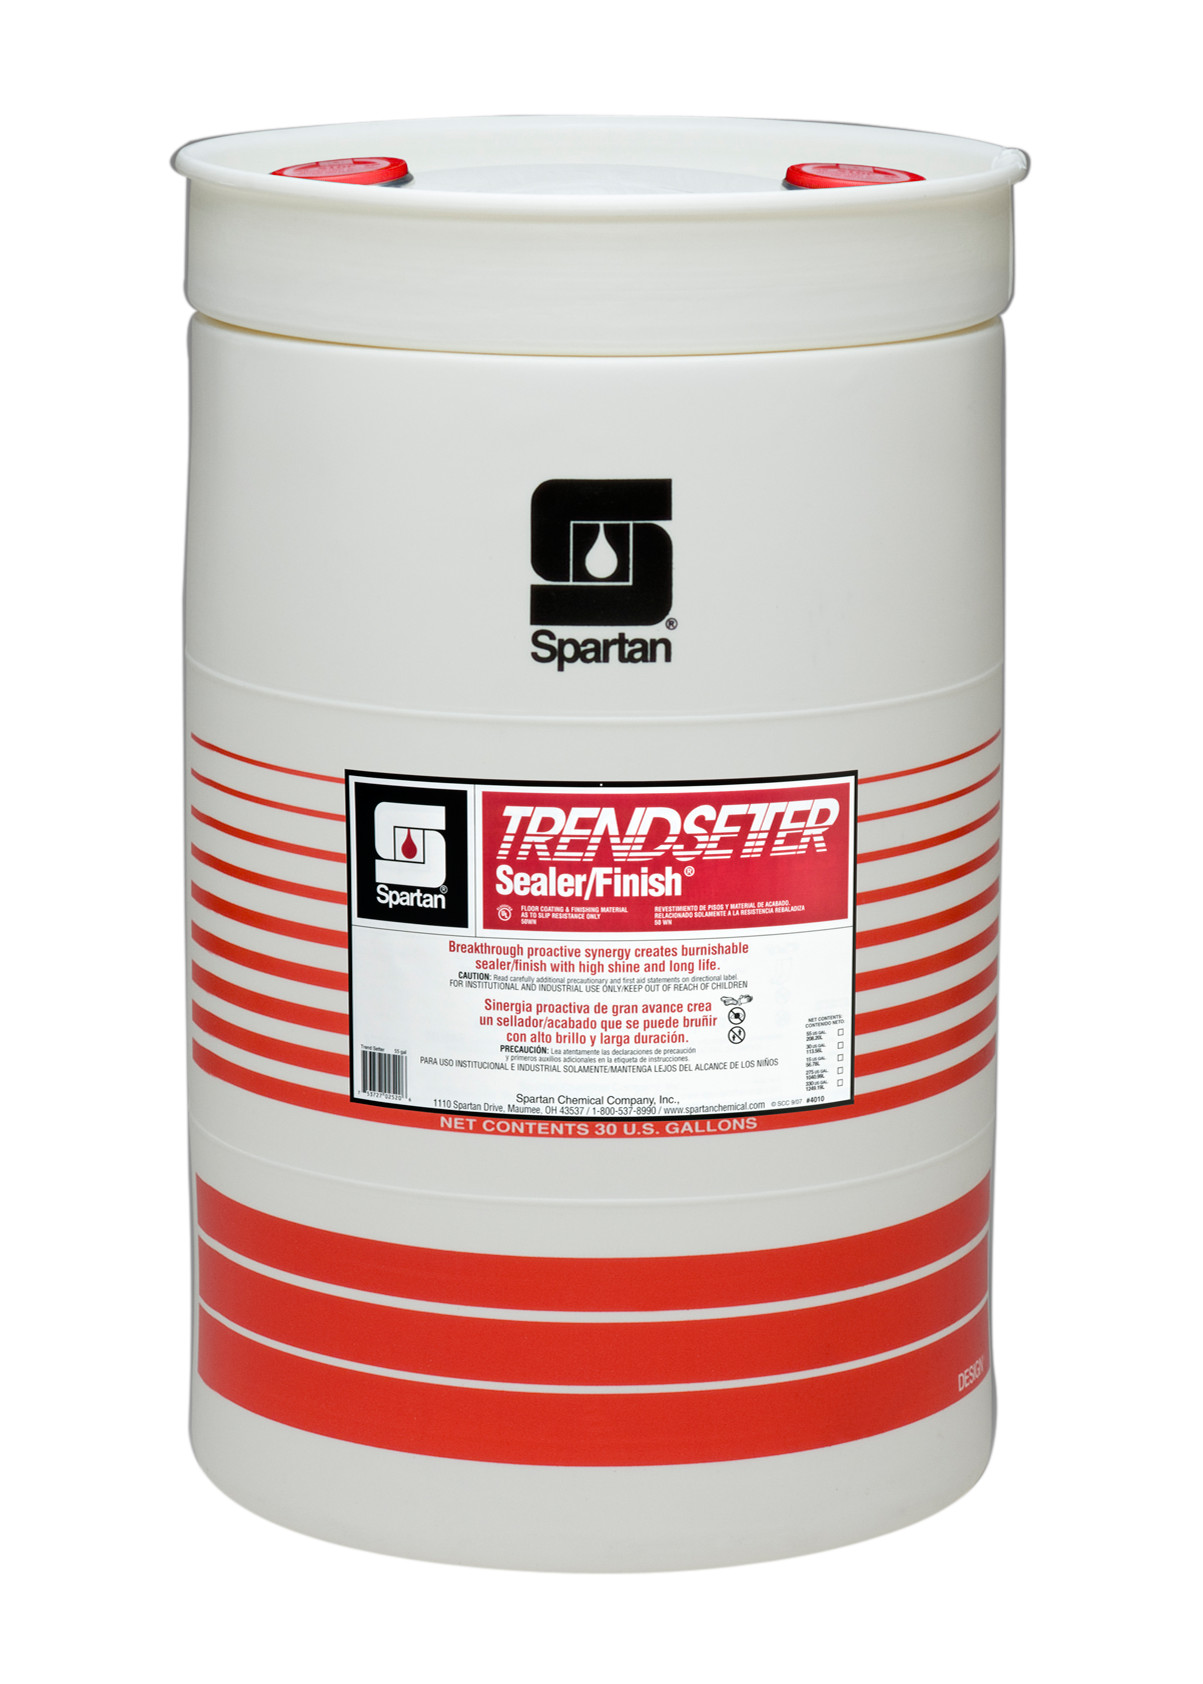 Spartan Chemical Company Trendsetter Sealer/Finish, 30 GAL DRUM